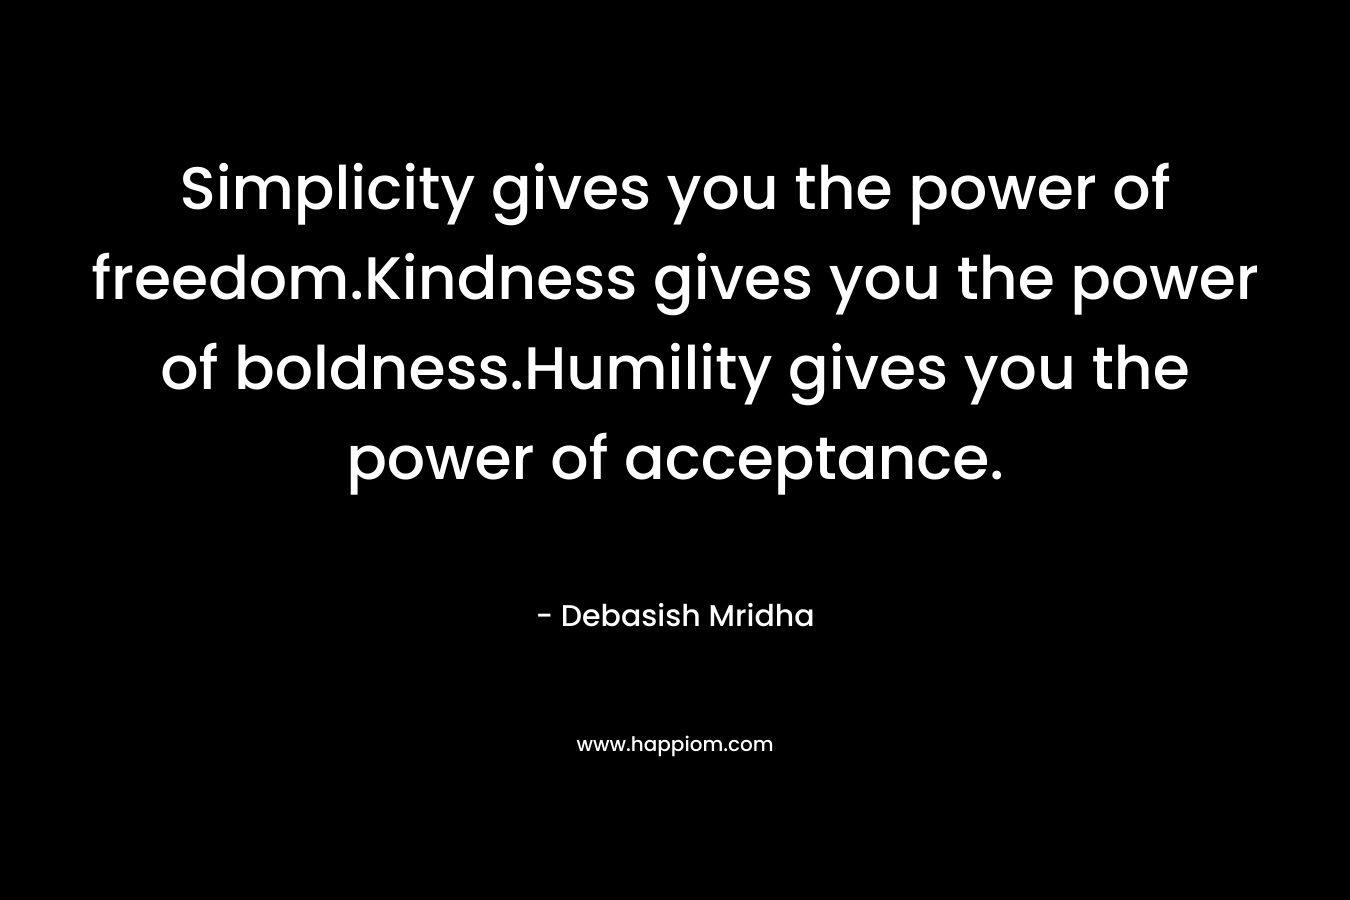 Simplicity gives you the power of freedom.Kindness gives you the power of boldness.Humility gives you the power of acceptance. – Debasish Mridha